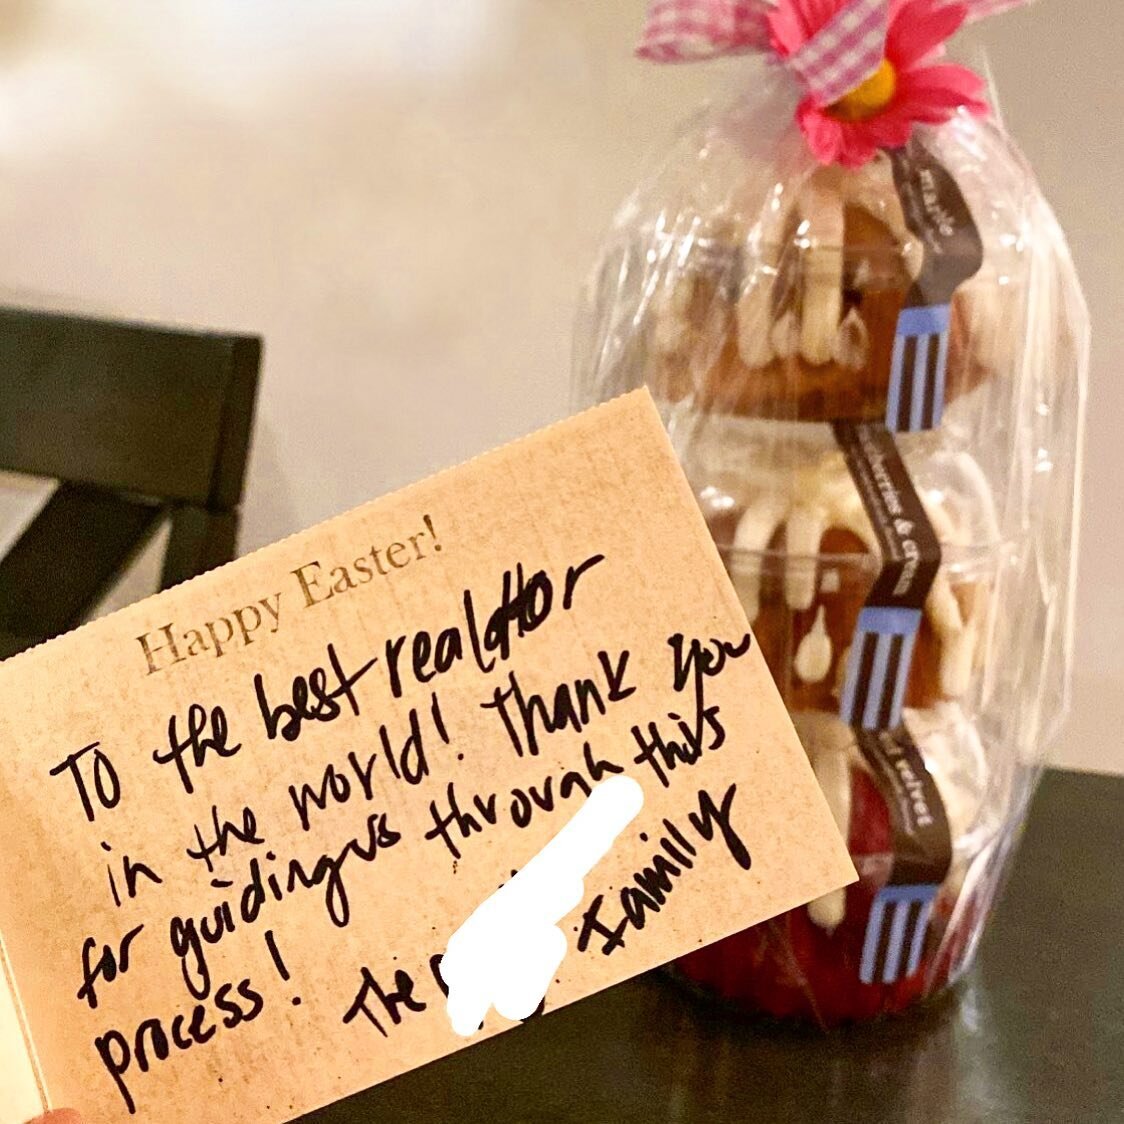 Receiving this sweet note and treat from my clients made my day! 🥰

Guiding people through one of the largest transactions of their lives is a privilege and inherently holds a lot of responsibility. 

My job is to protect my clients, to keep them in